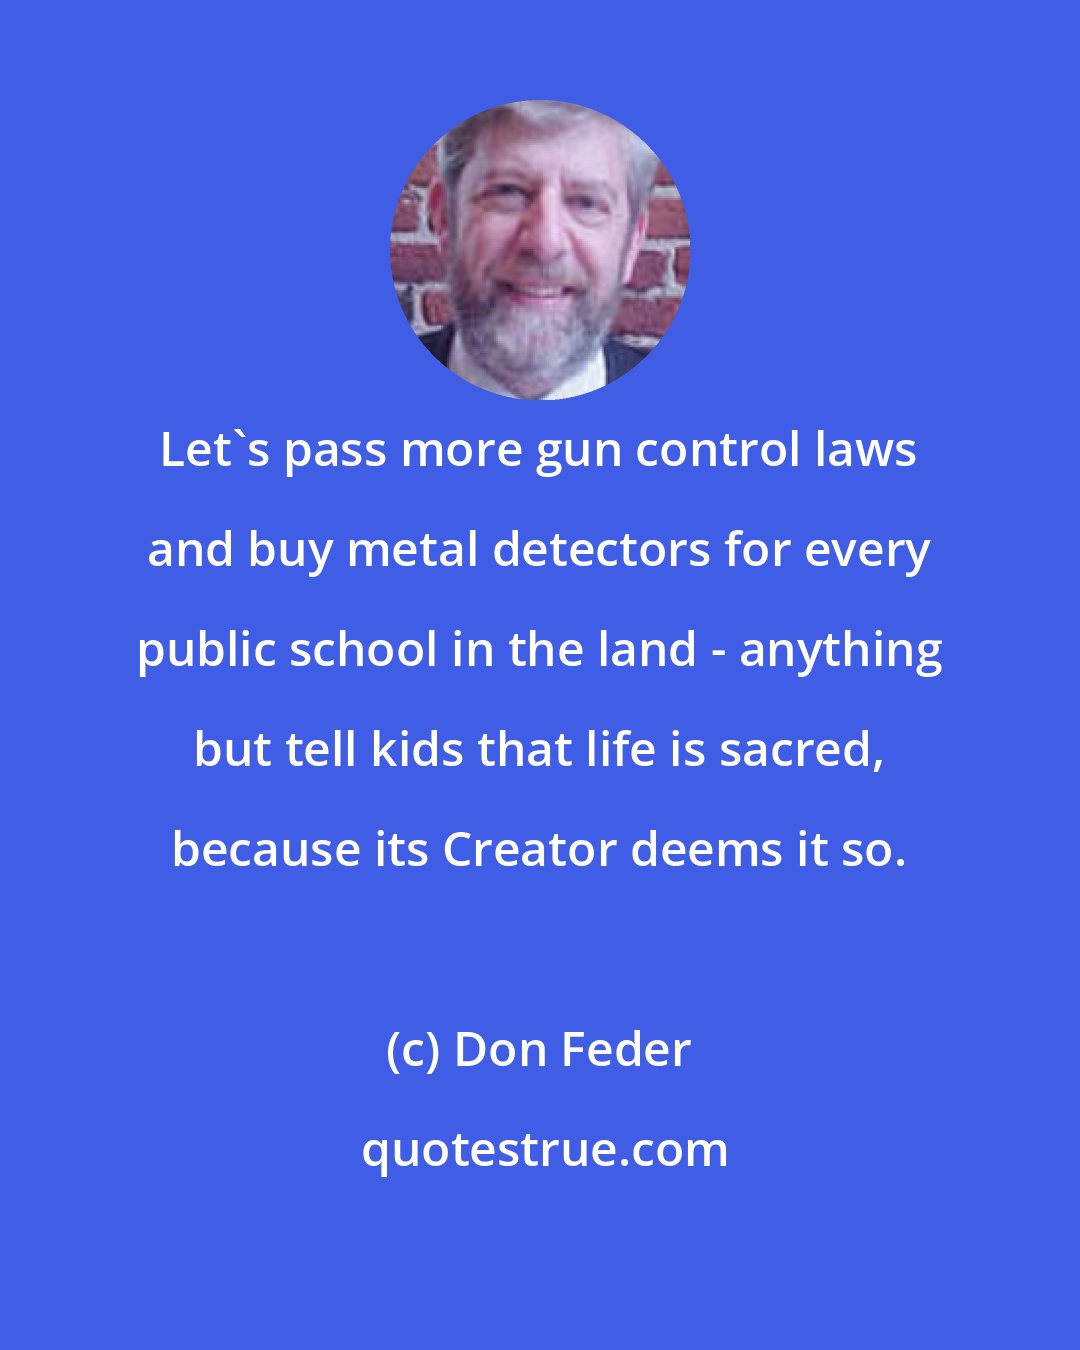 Don Feder: Let's pass more gun control laws and buy metal detectors for every public school in the land - anything but tell kids that life is sacred, because its Creator deems it so.